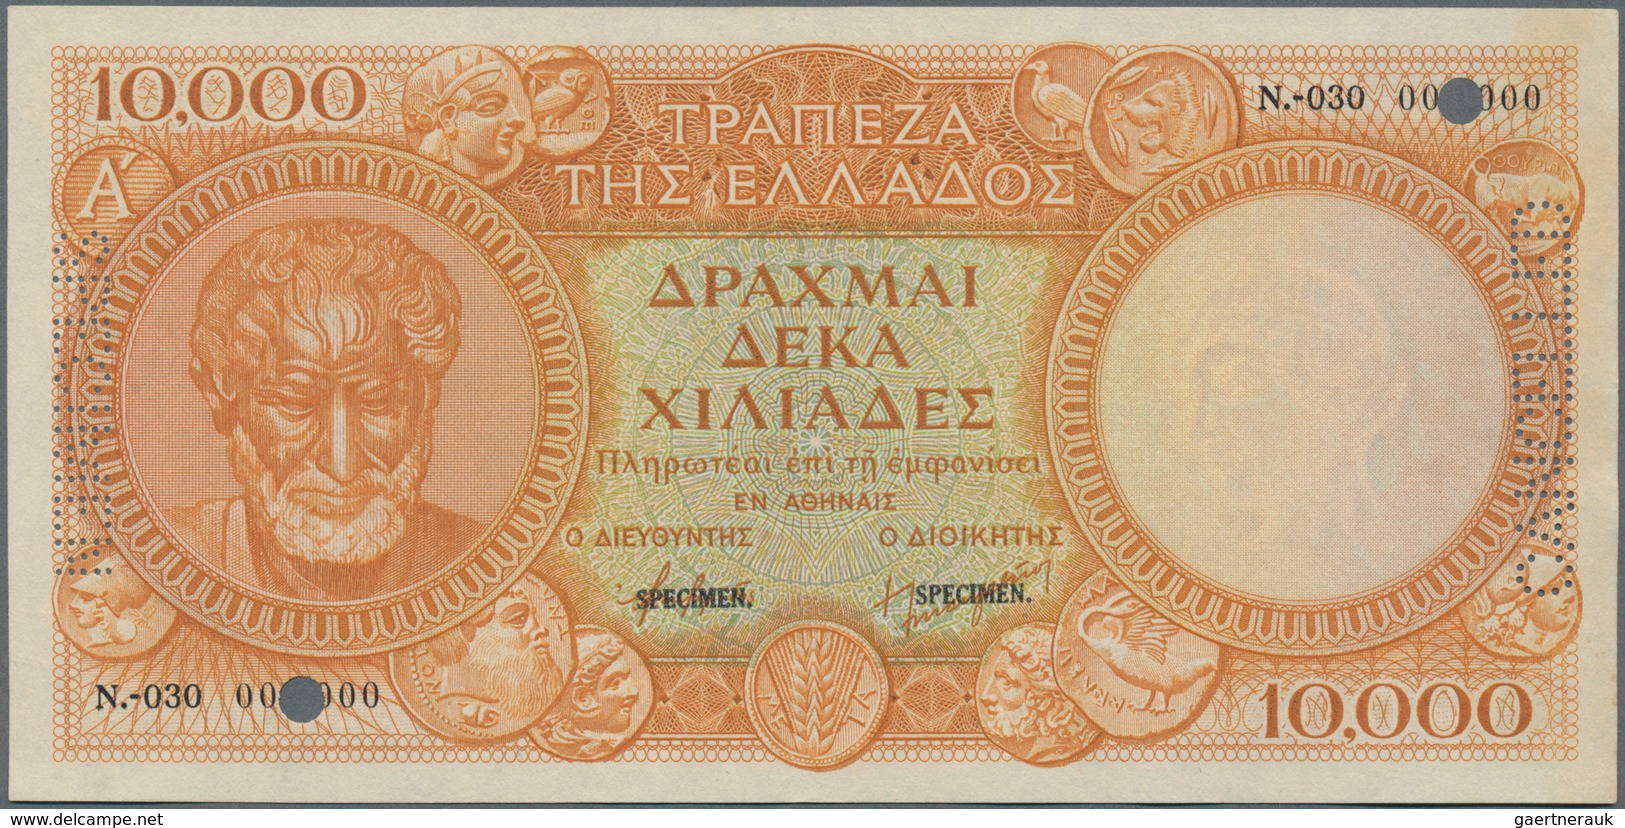 Greece / Griechenland: 10.000 Drachmai ND(1945) SPECIMEN, P.174s With Serial Number N-030 000000, Bl - Griekenland